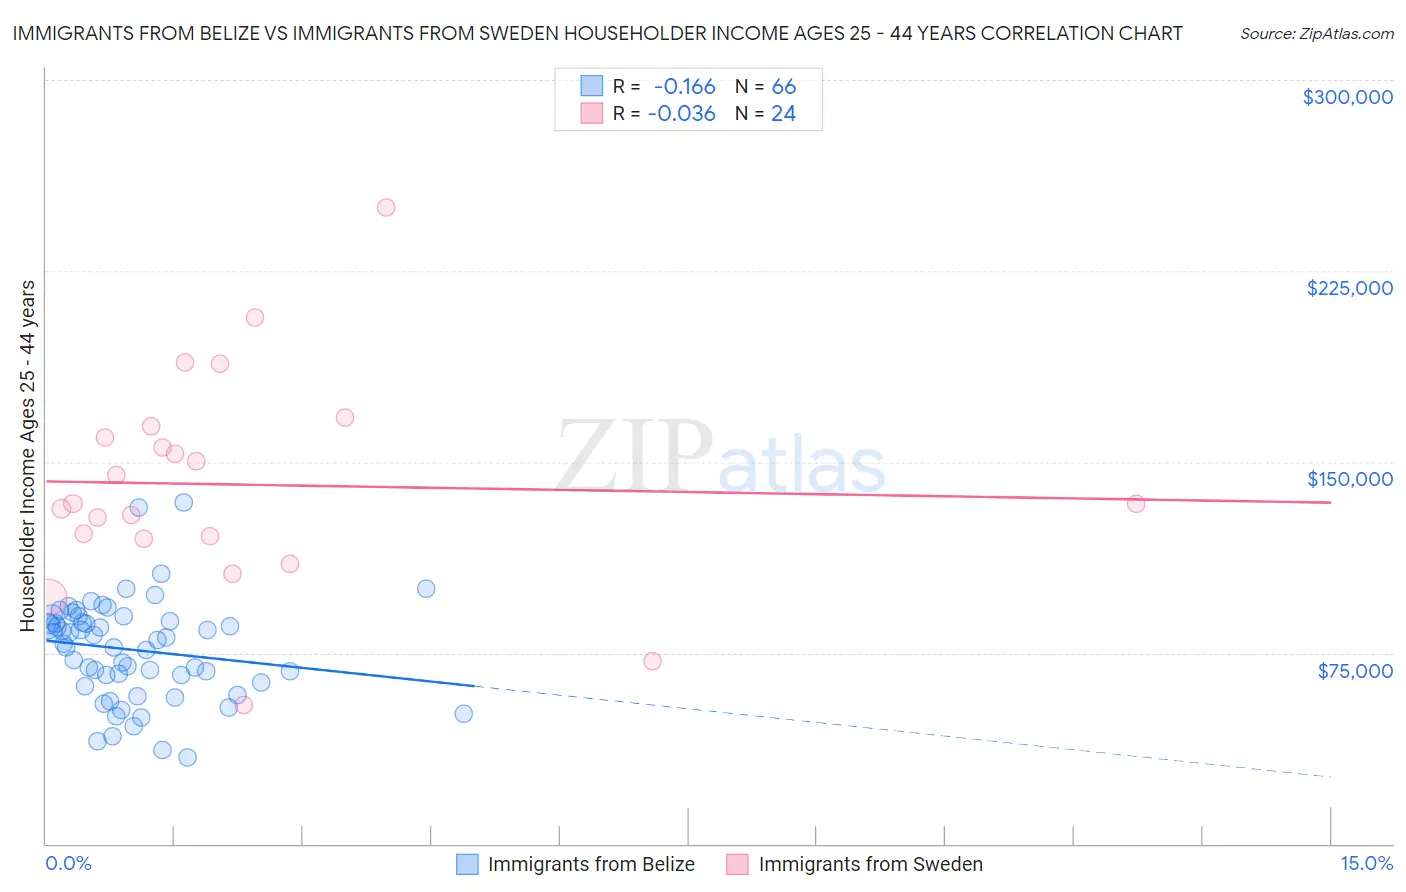 Immigrants from Belize vs Immigrants from Sweden Householder Income Ages 25 - 44 years